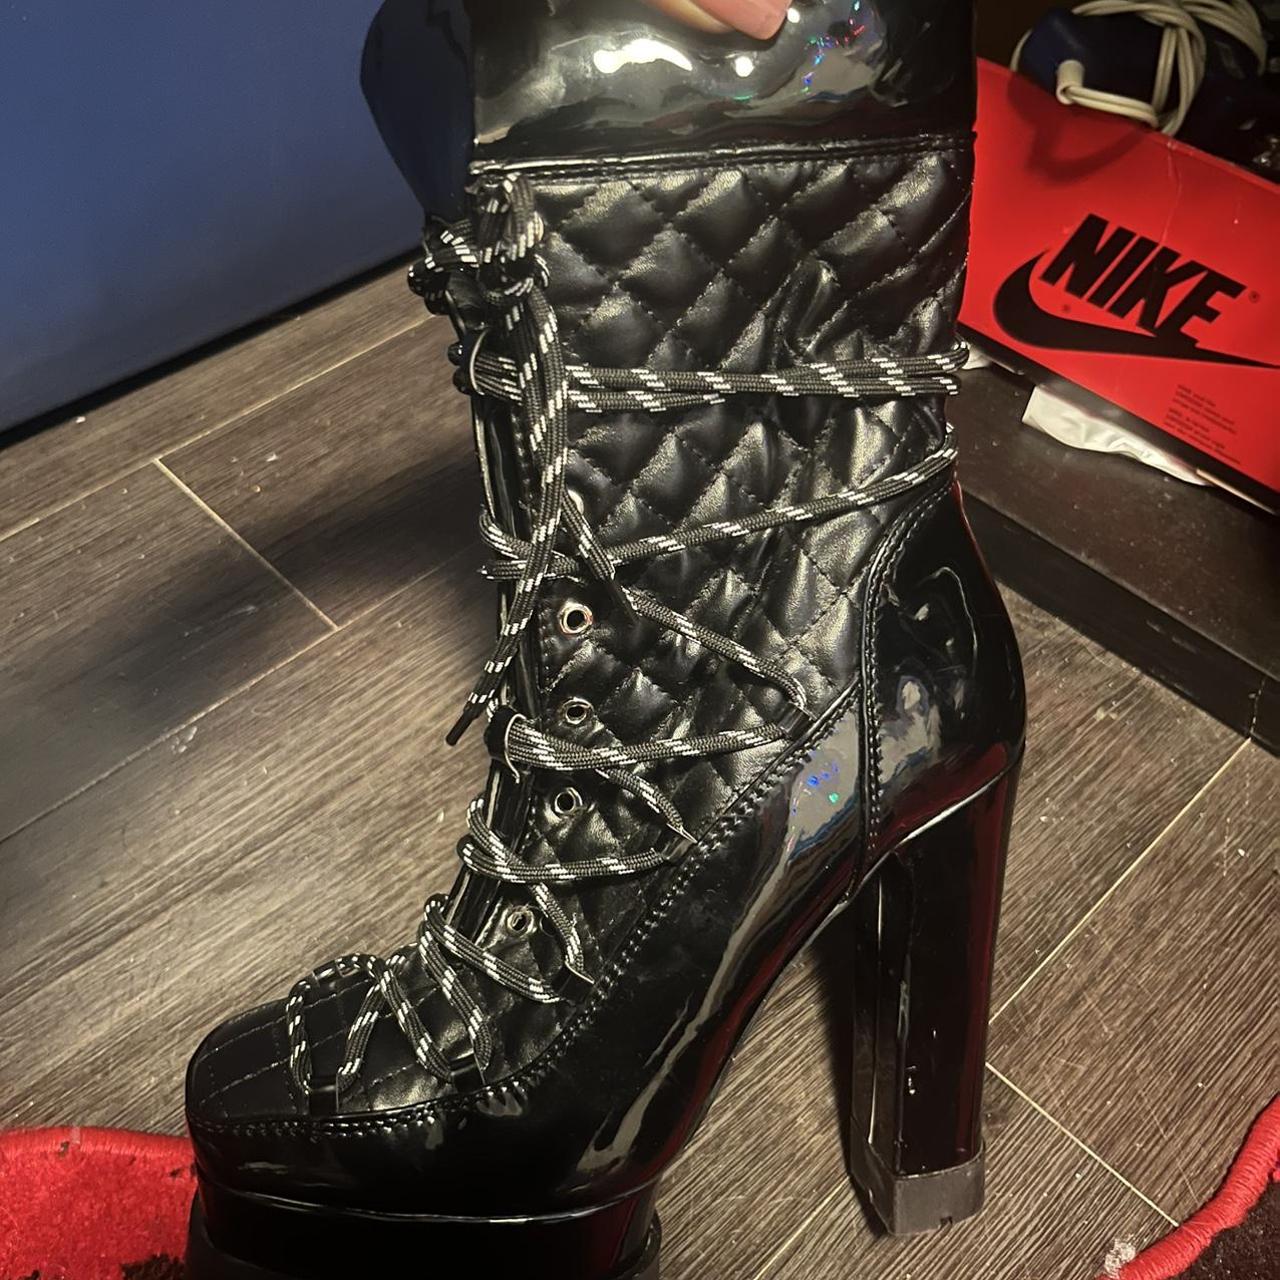 Women's Black and White Boots | Depop